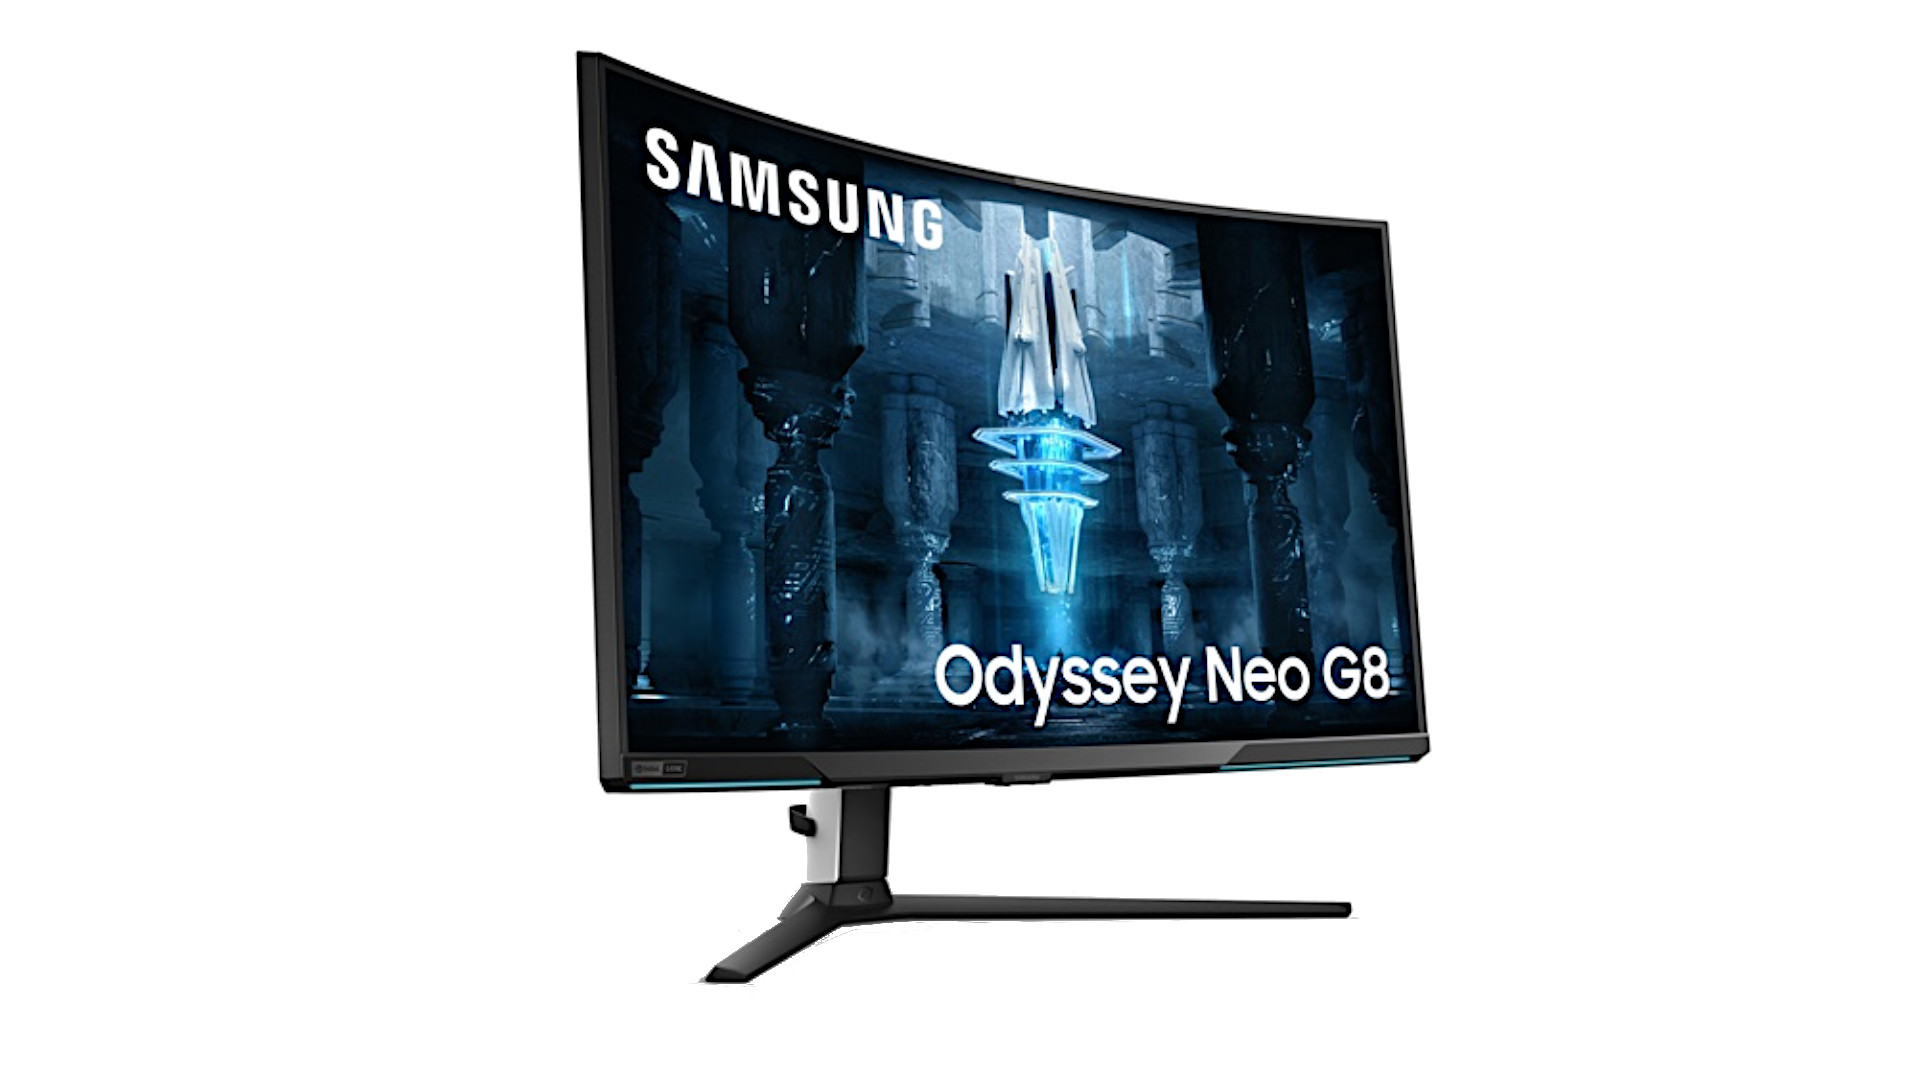 Samsung announces the Odyssey Neo G8, the world's first 4K 240Hz gaming monitor